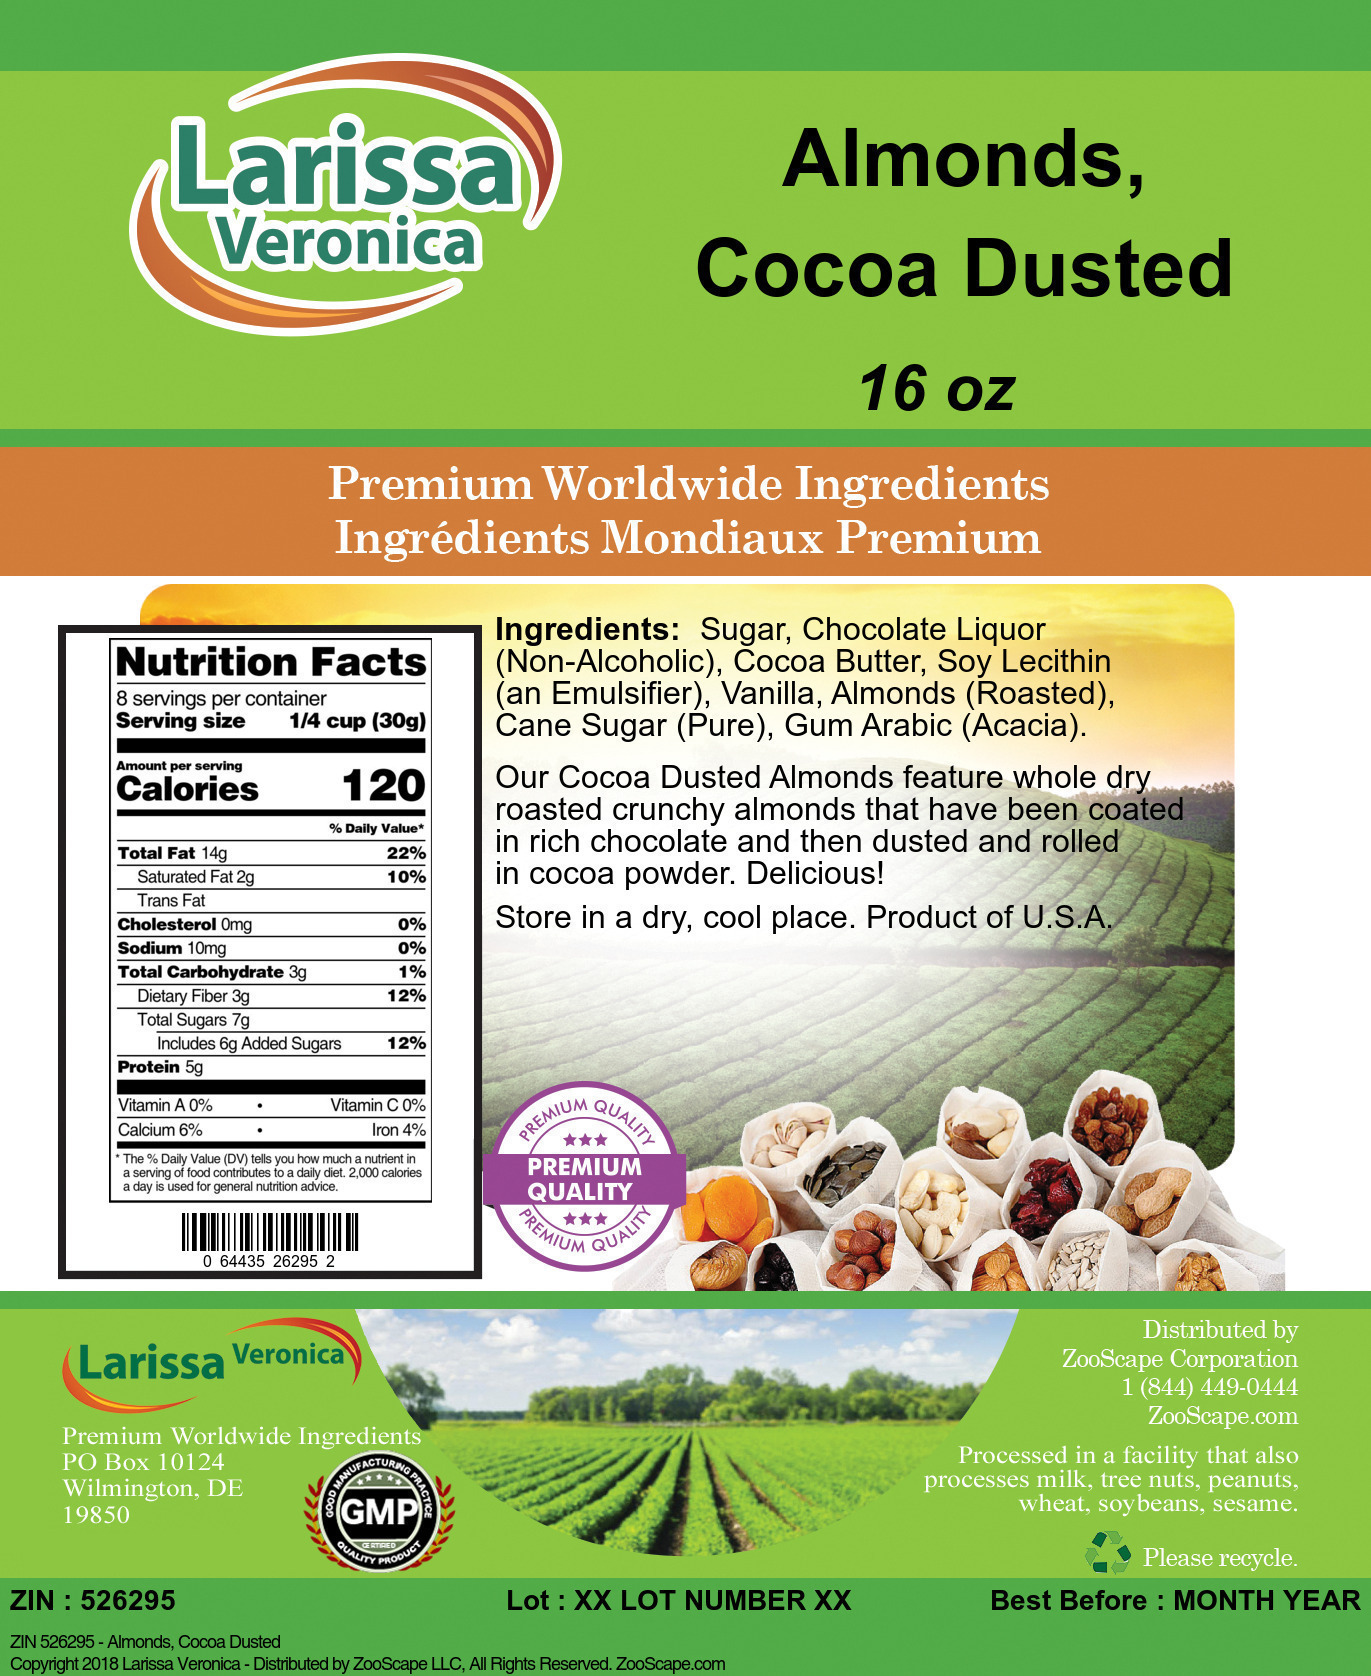 Almonds, Cocoa Dusted - Label